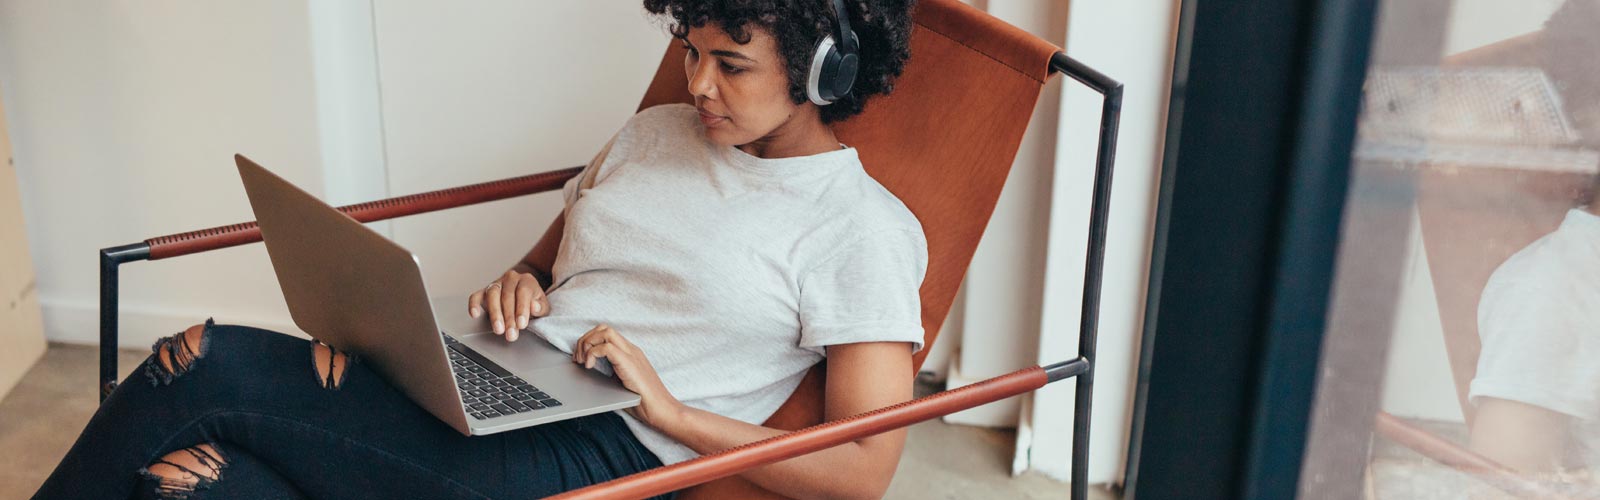 Woman with headphones on working on a laptop on a comfortable chair